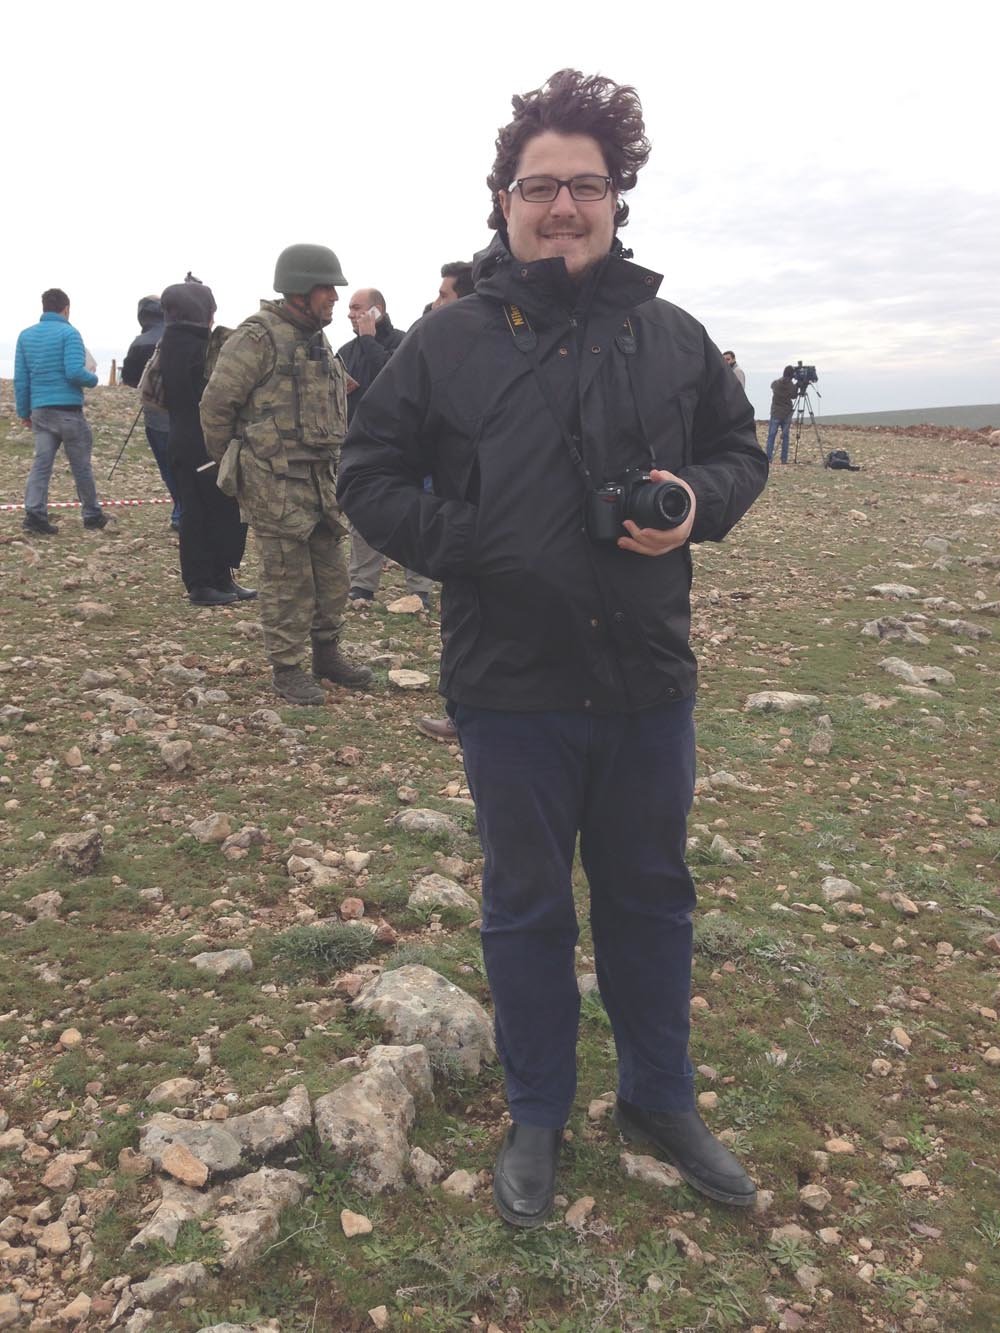 While a journalist in 2013, Omer Onder is at the Turkey and Syria border following a story about Syrian refugees entering Turkey.